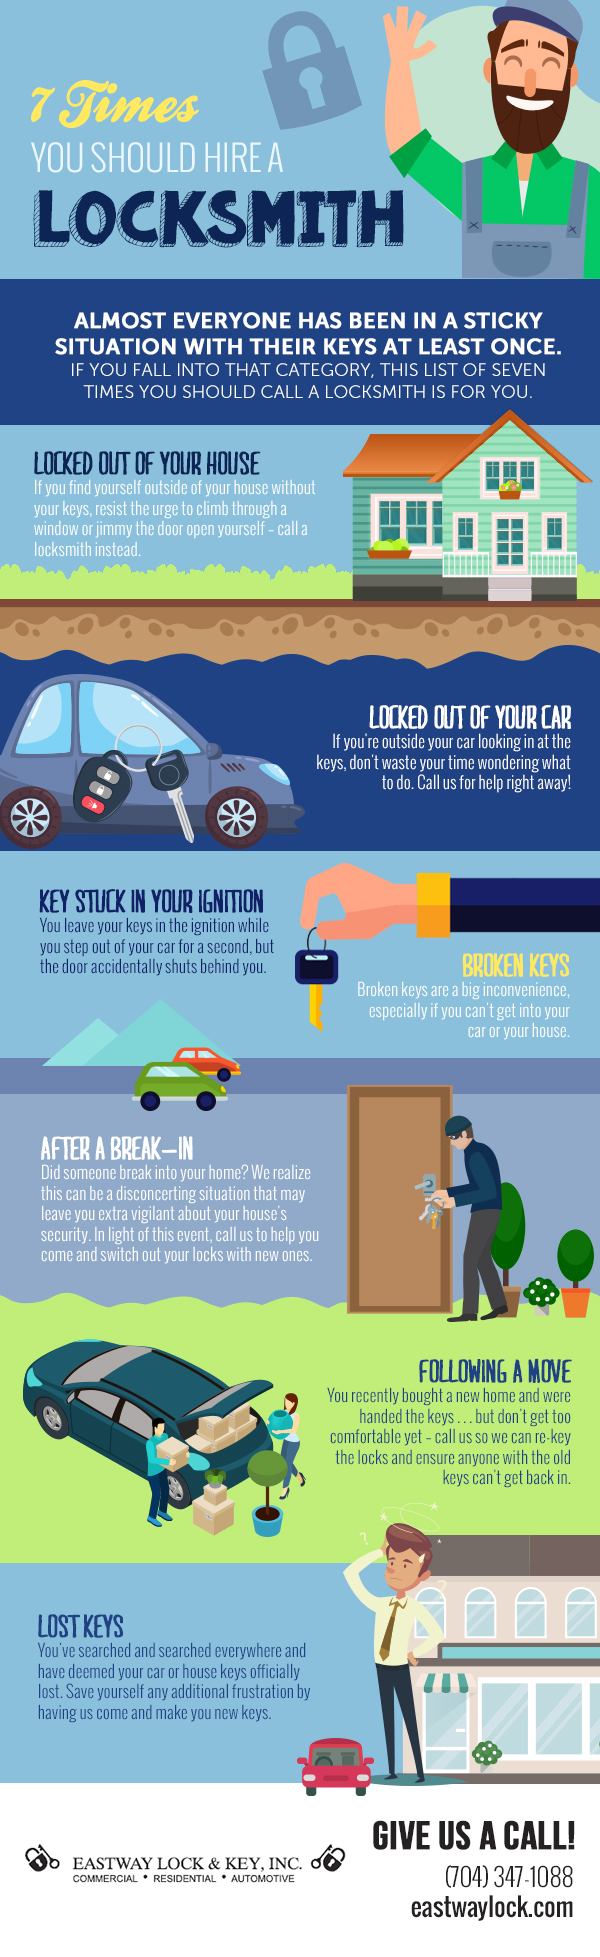 7 Times You Should Hire a Locksmith [infographic]